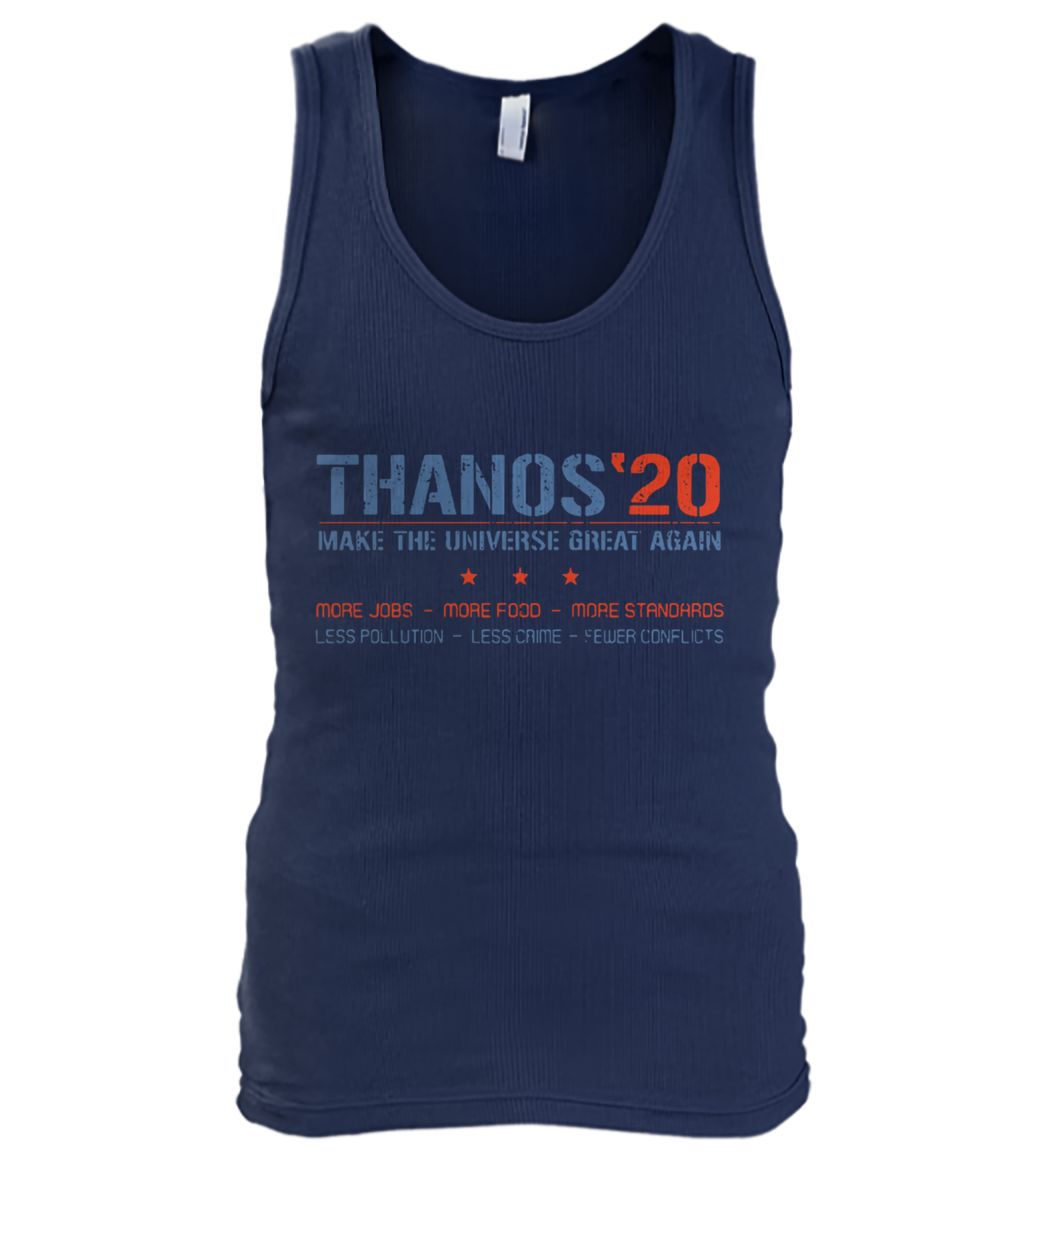 Thanos'20 make the universe great again more jobs more food more standards men's tank top